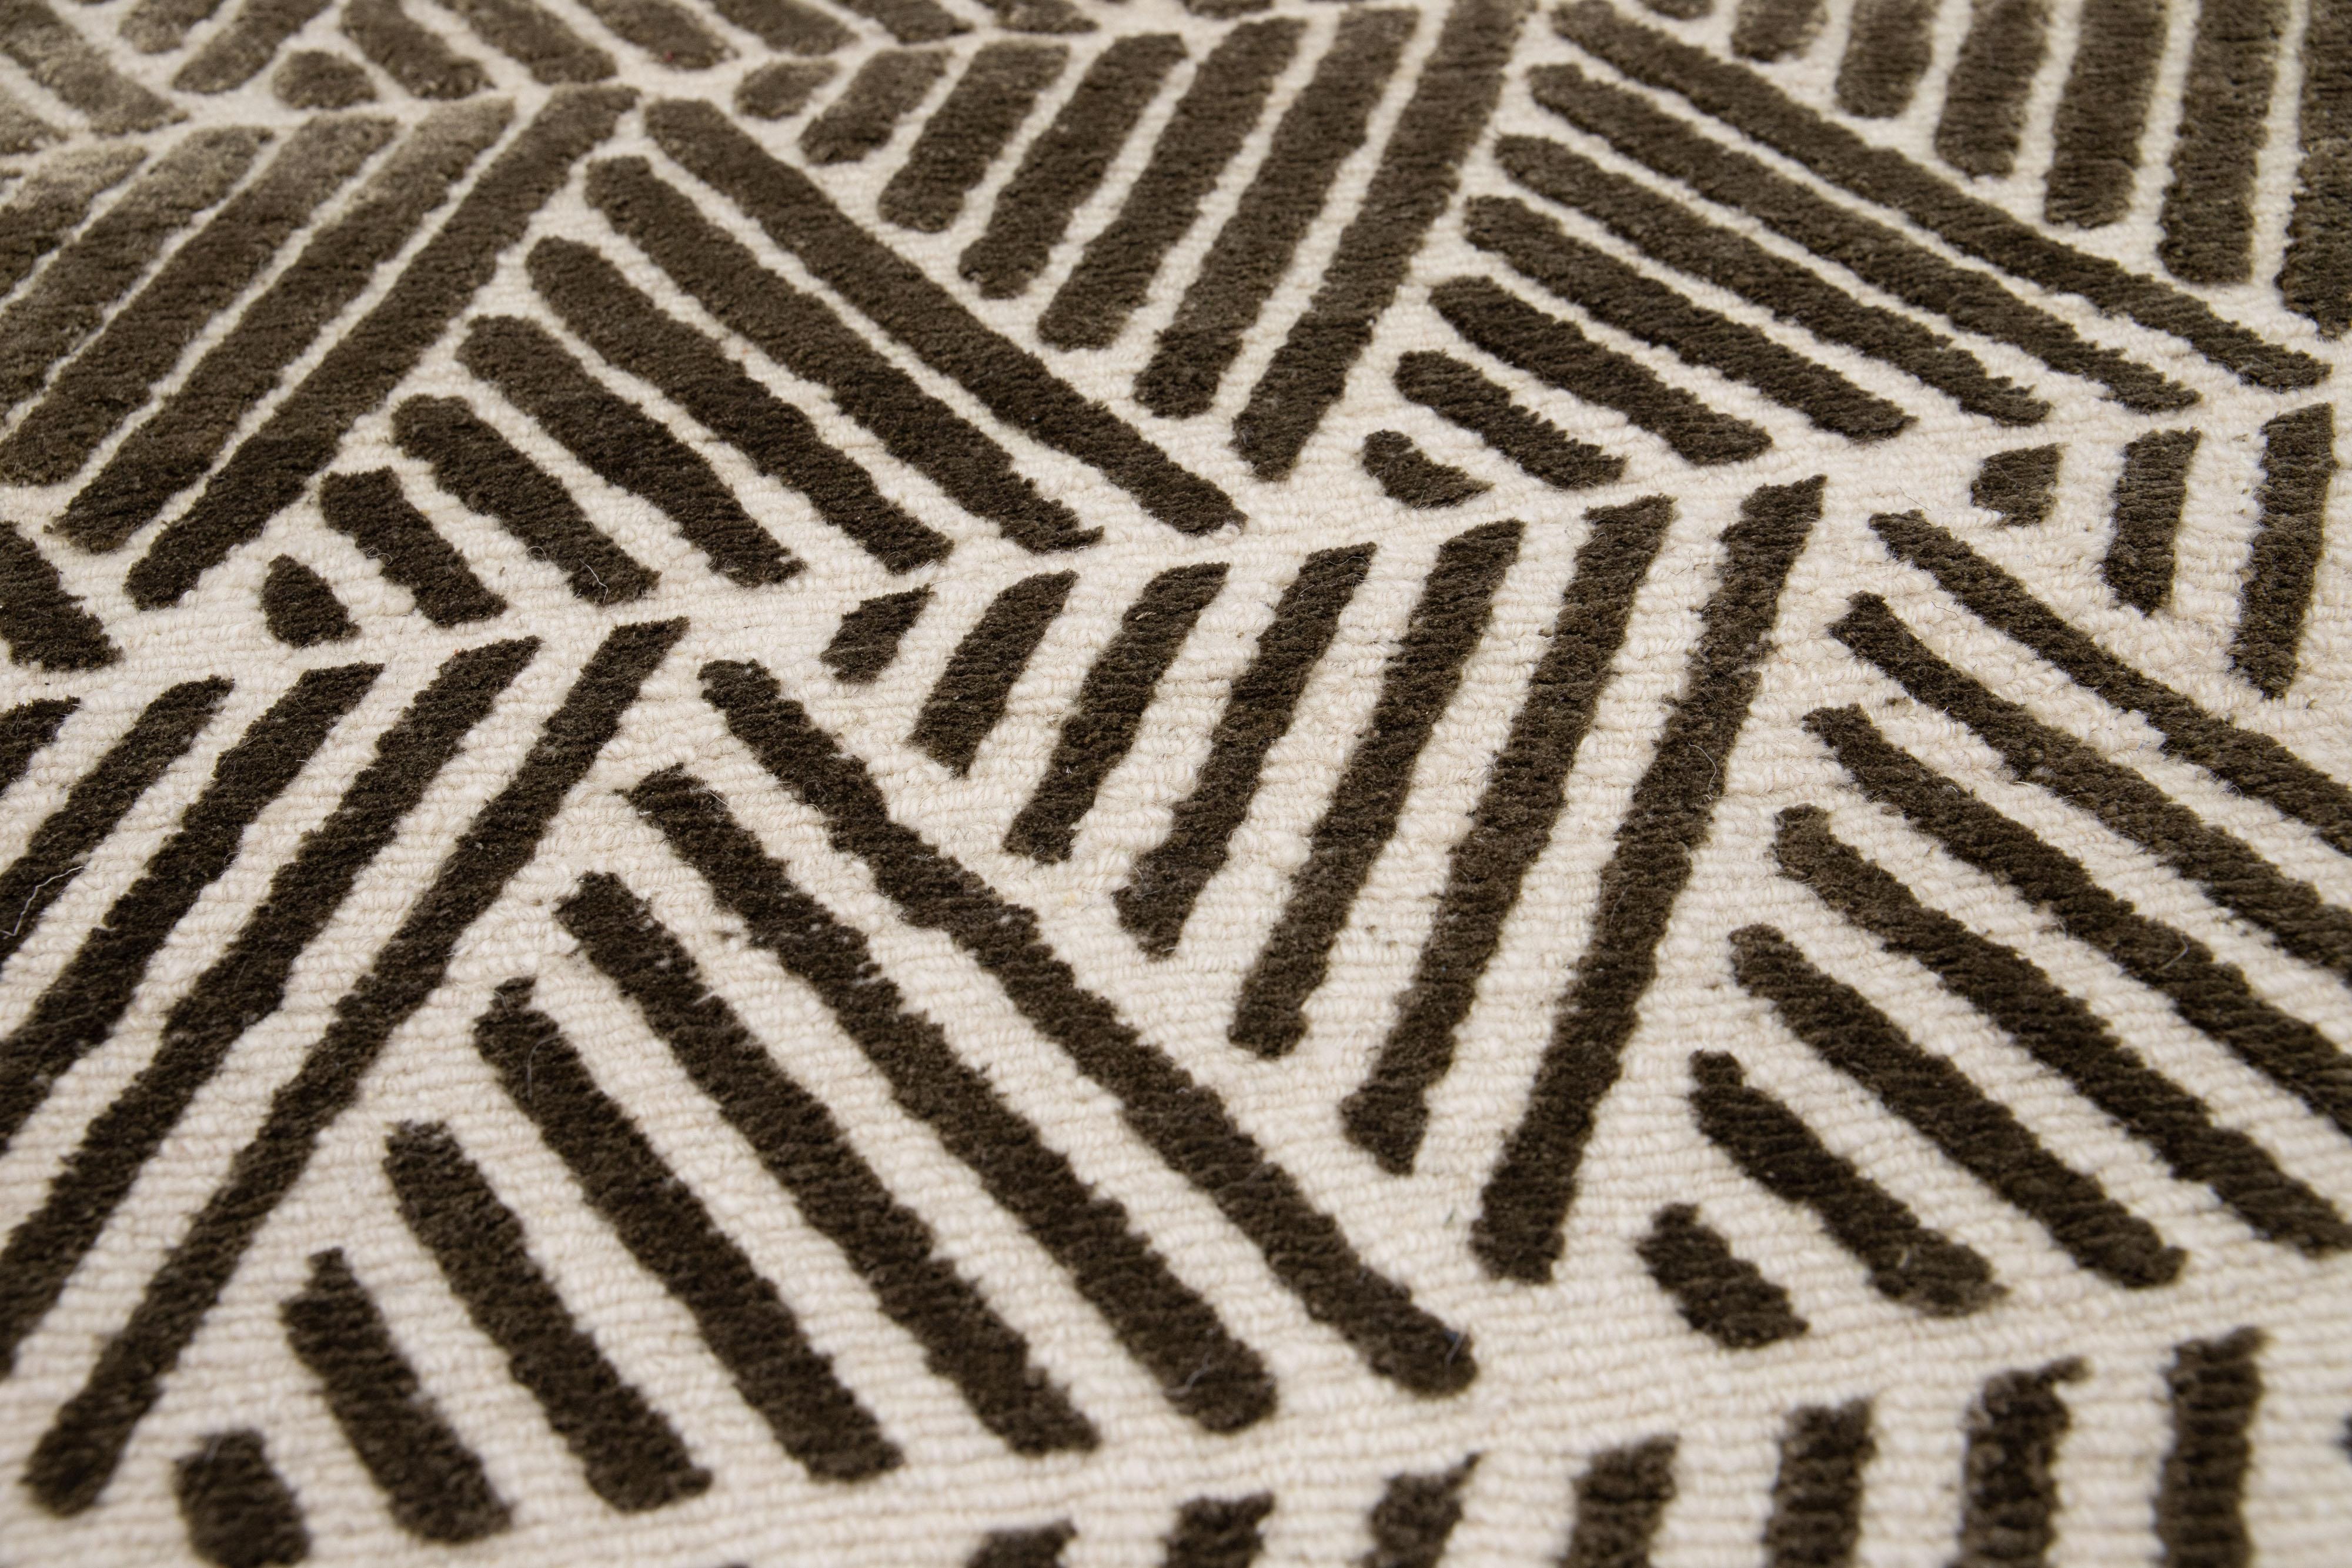 Apadana's Modern wool and silk custom rug. Custom sizes and colors made-to-order.

Material: 100 Knots, 50 Wool and 50 Silk.
Techniques: hand knotted.
Style: Modern.
Lead time: Approx. 15-16 weeks available.
Colors: As shown, other custom